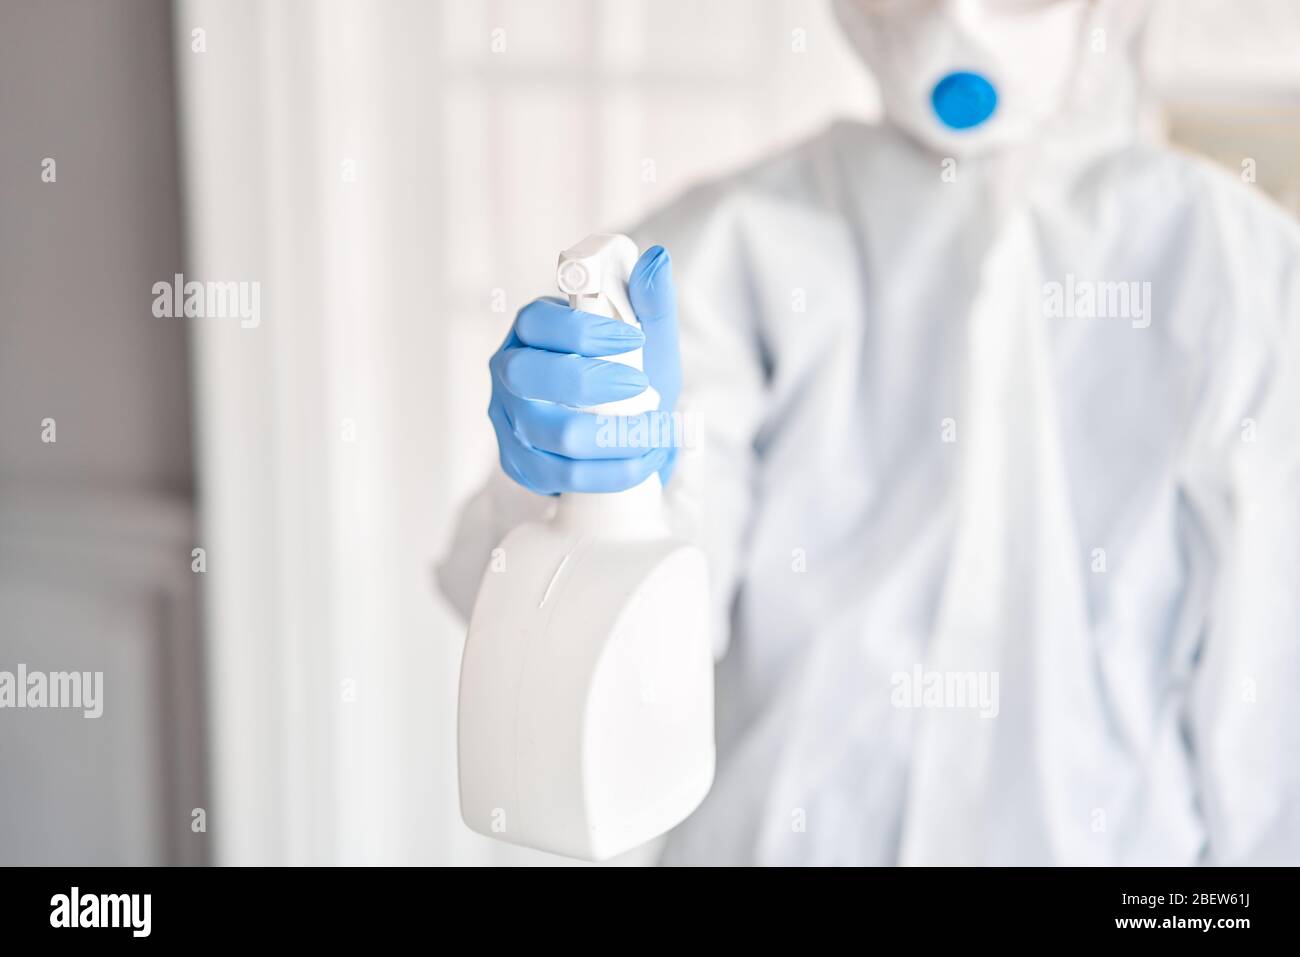 White spray bottle in woman hands in a protective suit and blue gloves. Disinfection, cleaning and washing. COVID-19. Prevention of coronavirus Stock Photo